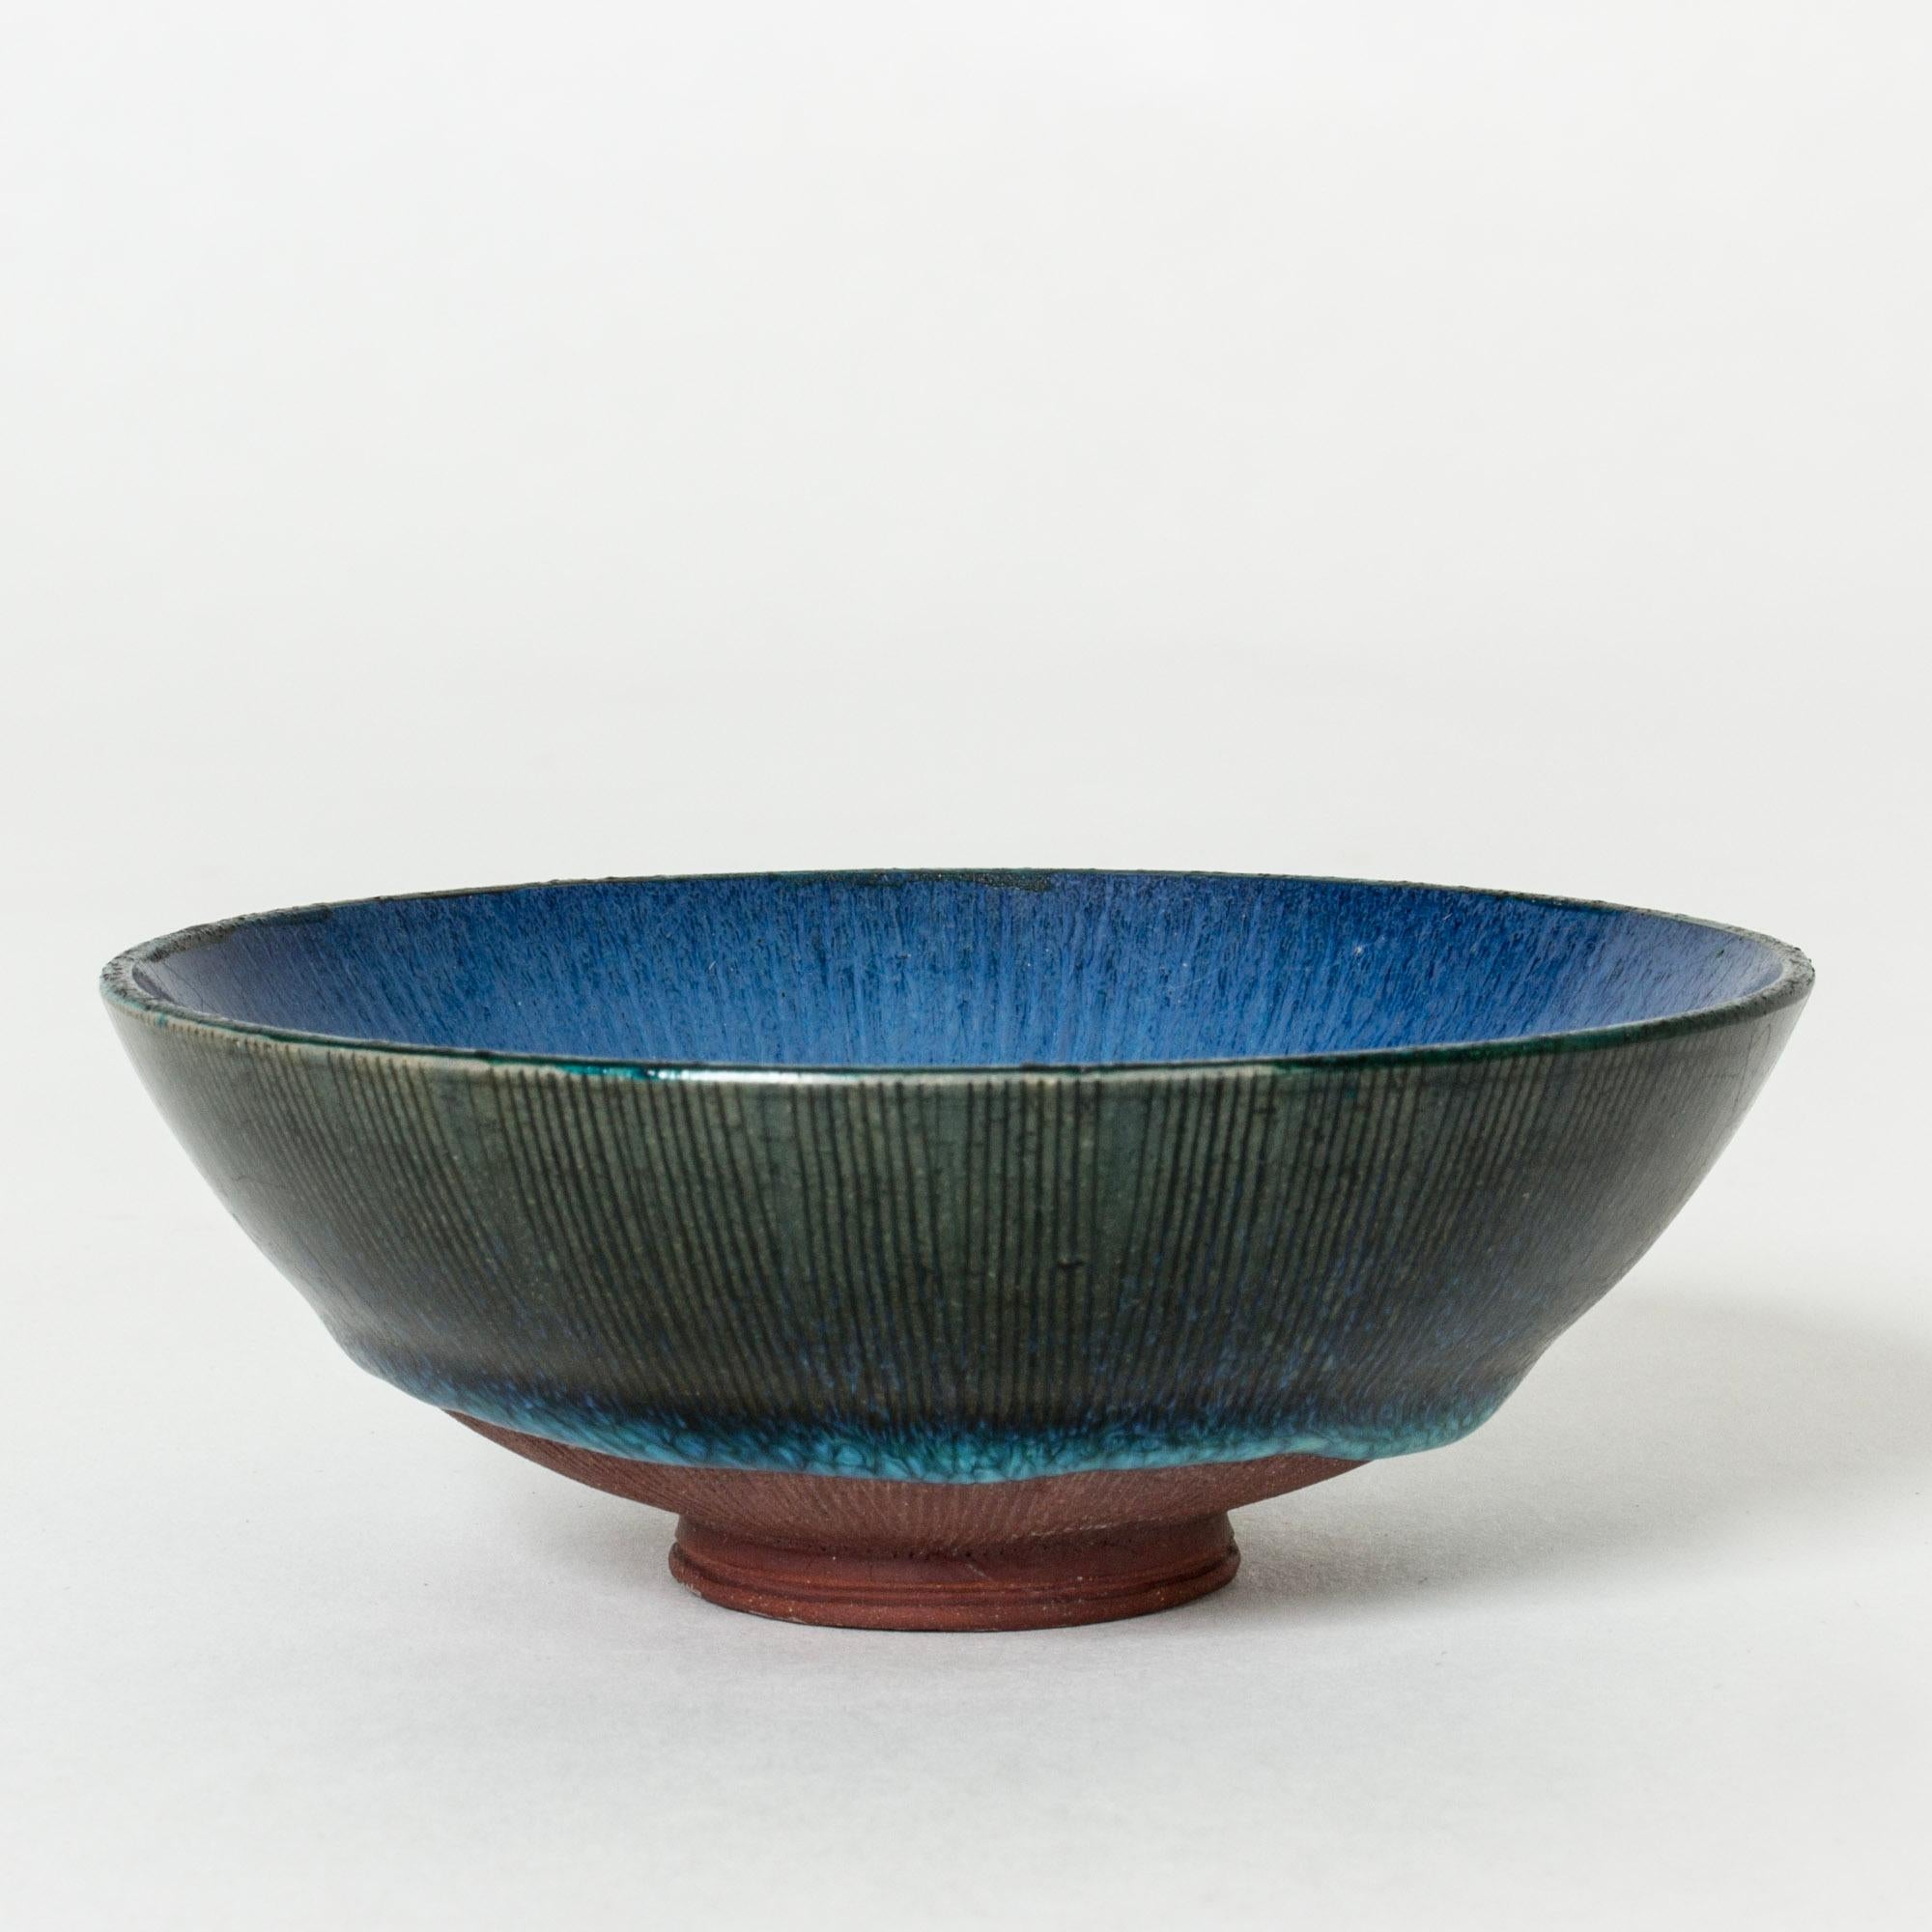 Lovely, small stoneware bowl by Wilhelm Kåge. Unglazed base and inside in vibrant, glossy blue coming over the edge and gathering in a thicker drip close to the bottom.

“Farsta” stoneware is recognized as being the best and most exclusive that has